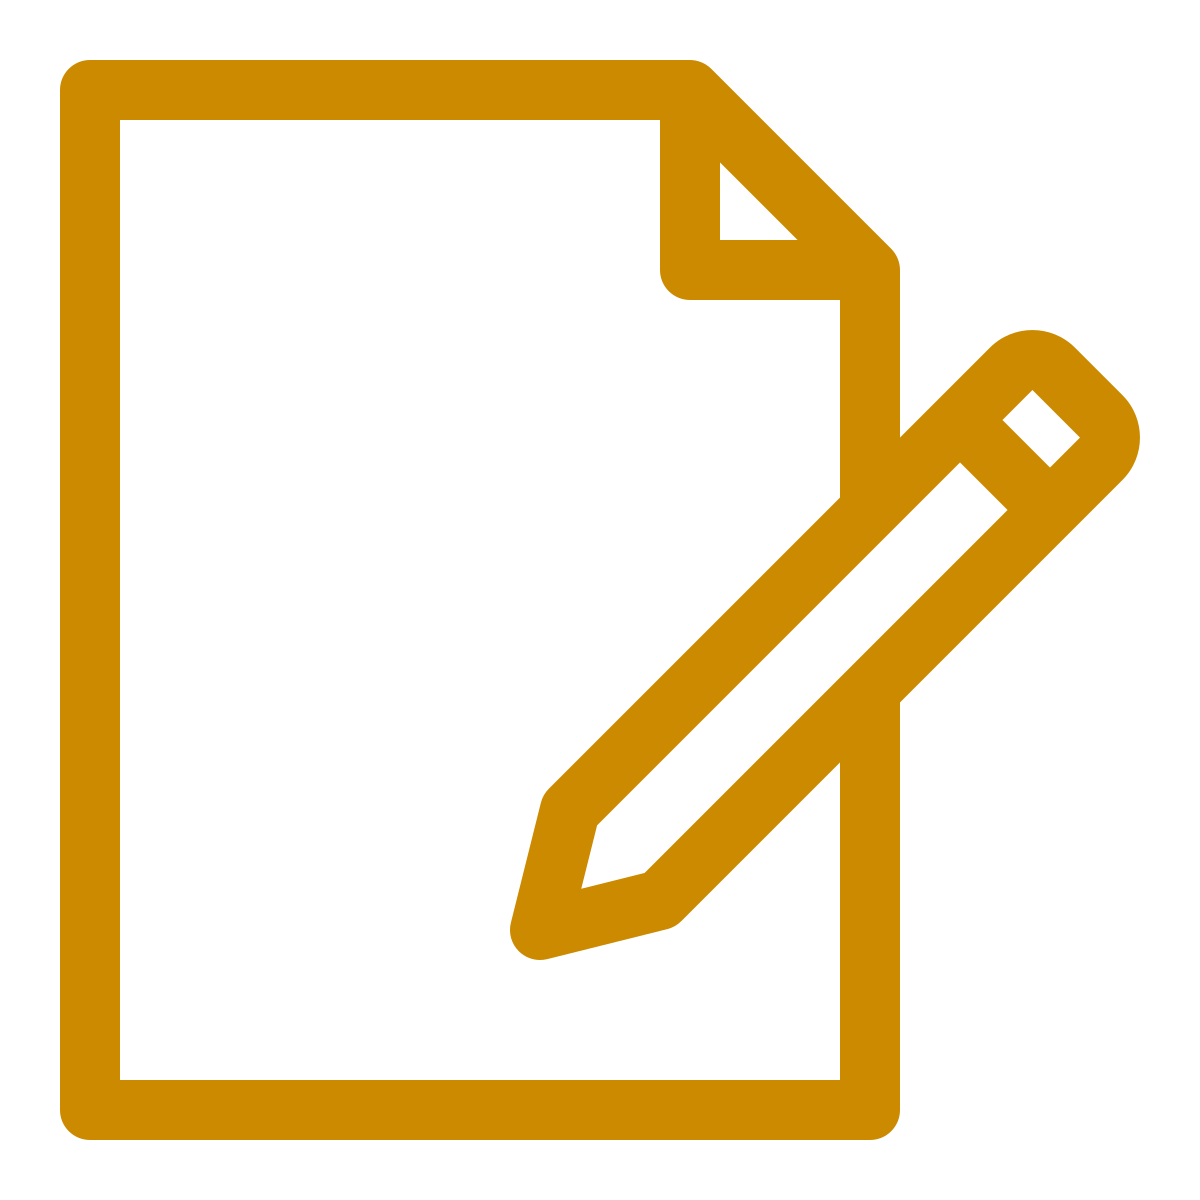 paper and pencil icon in turmeric